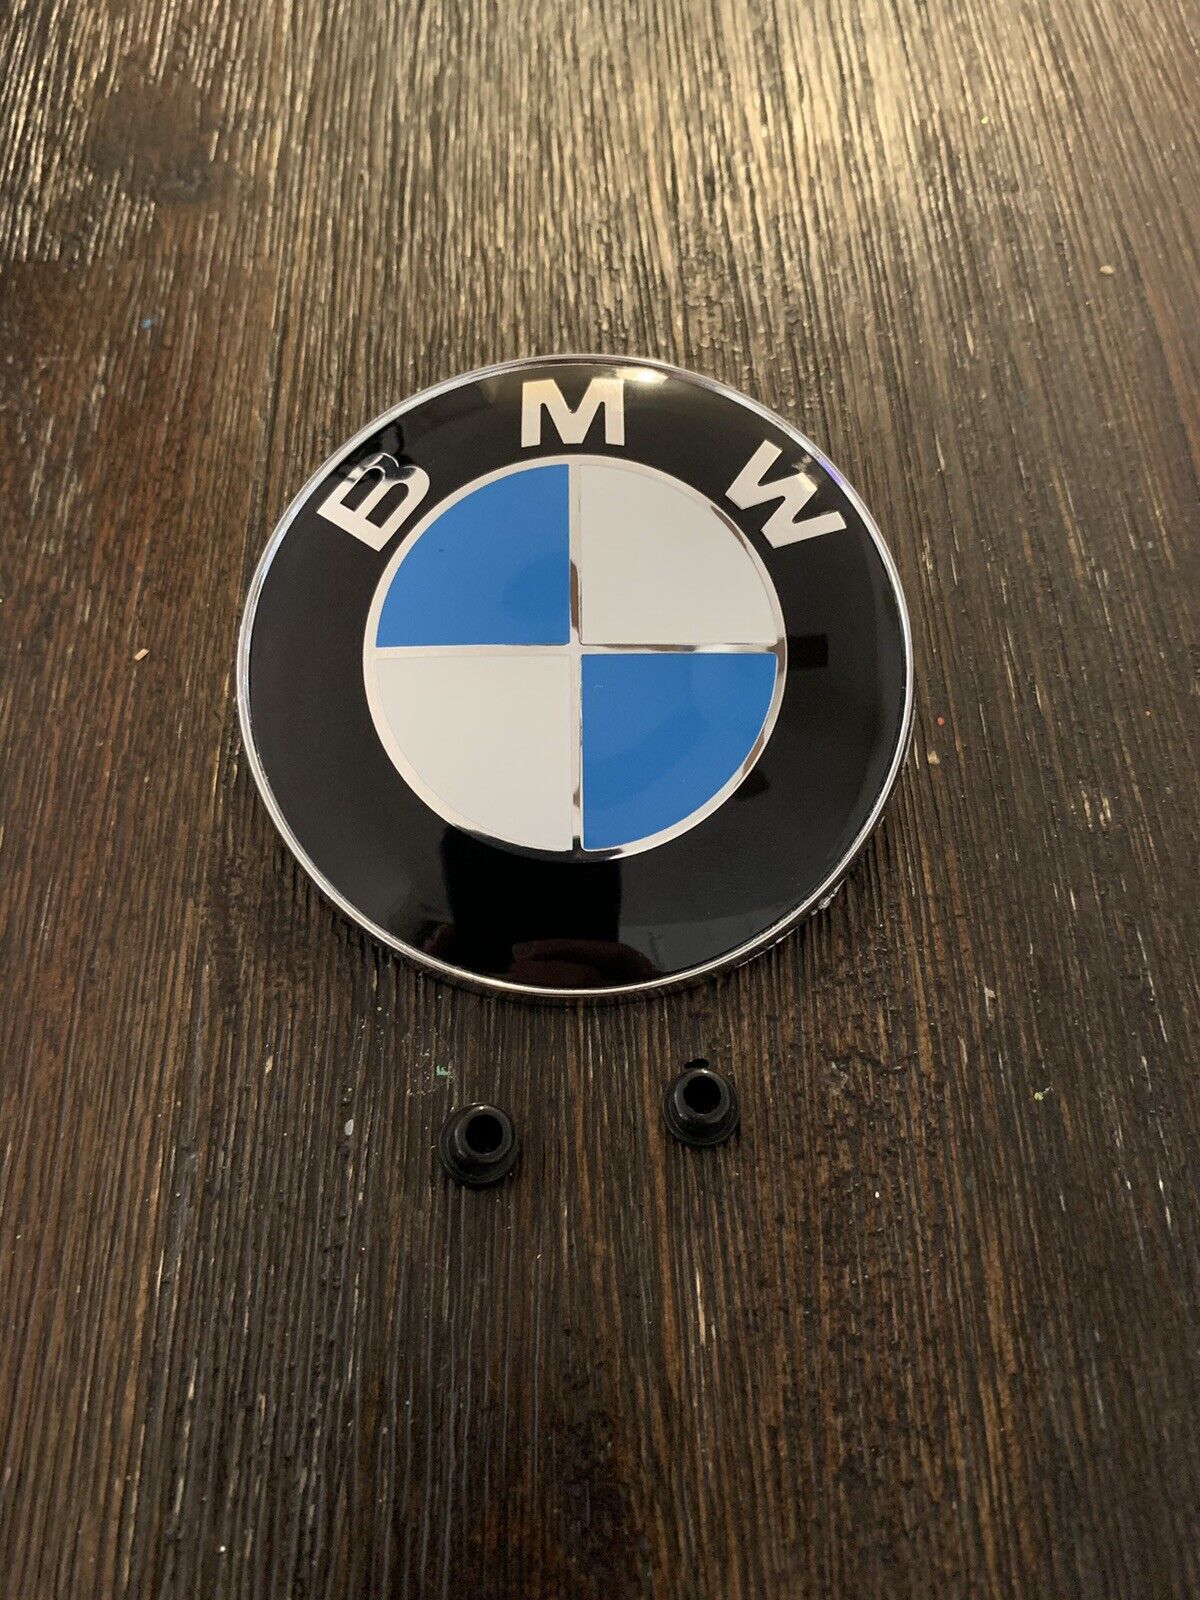 BMW Replacement Upgrade for Hood 82mm (3.2in) Badge w/ Emblem Grommets